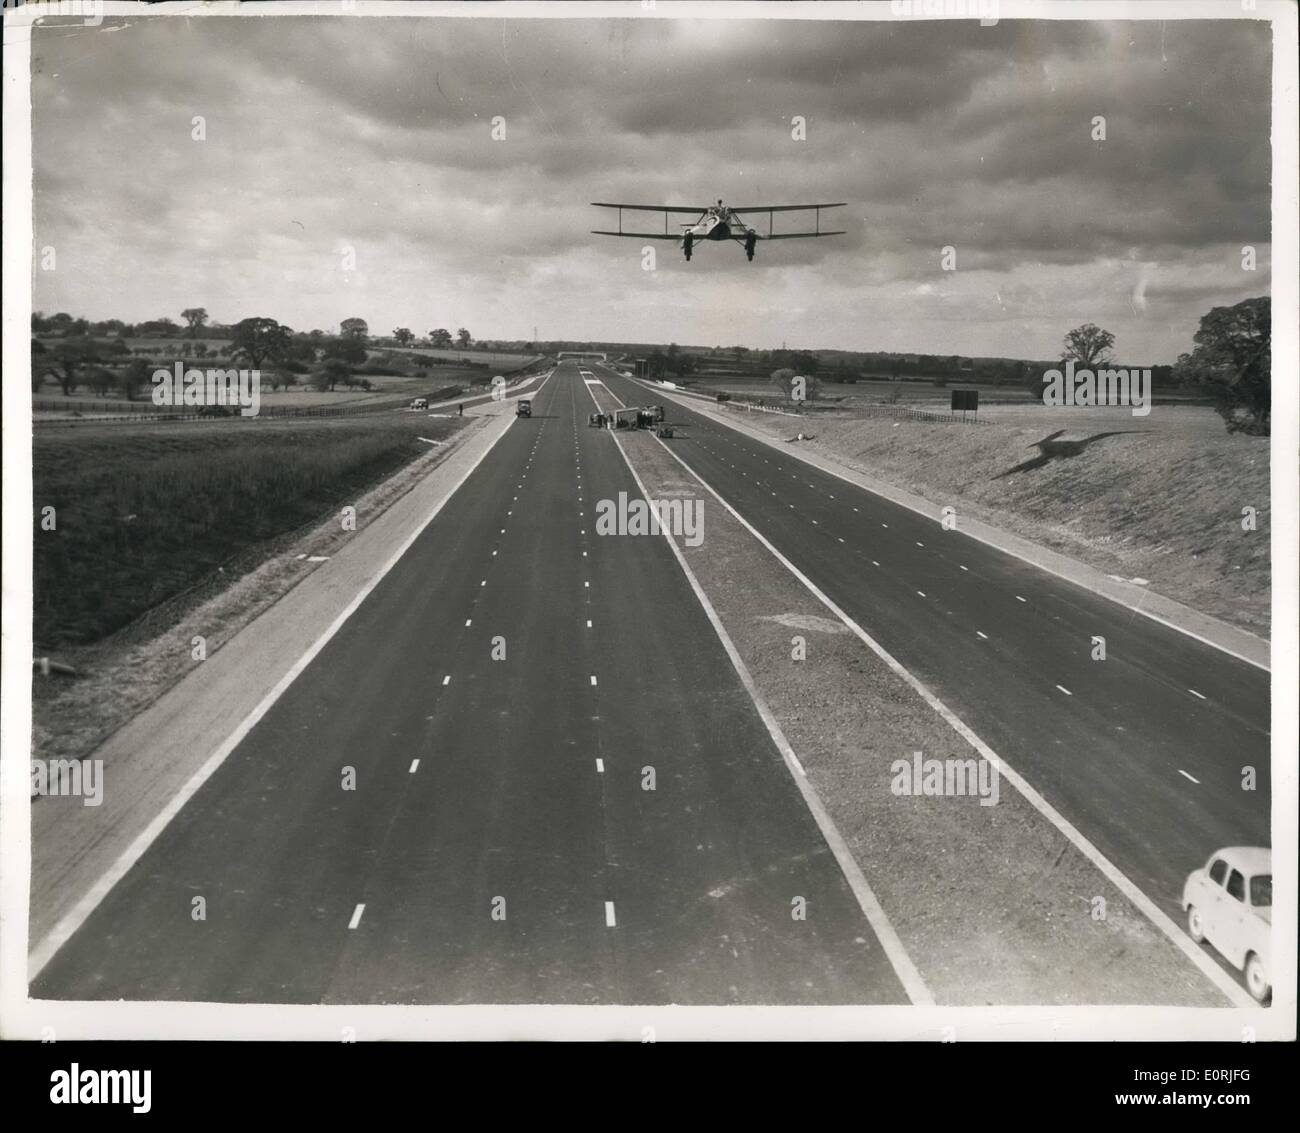 Oct. 10, 1959 - Air patrol for new London - Birmingham Motorway. : The new London - Birmingham Motorway will be the first in Britain to be regularly patrolled from the air - when it is opened next month. The Automobile Association is to provide continuous breakdown service out the motorway - including air patrols by spotter aircraft. The planes will be in constant radio contact with an A.A Stock Photo